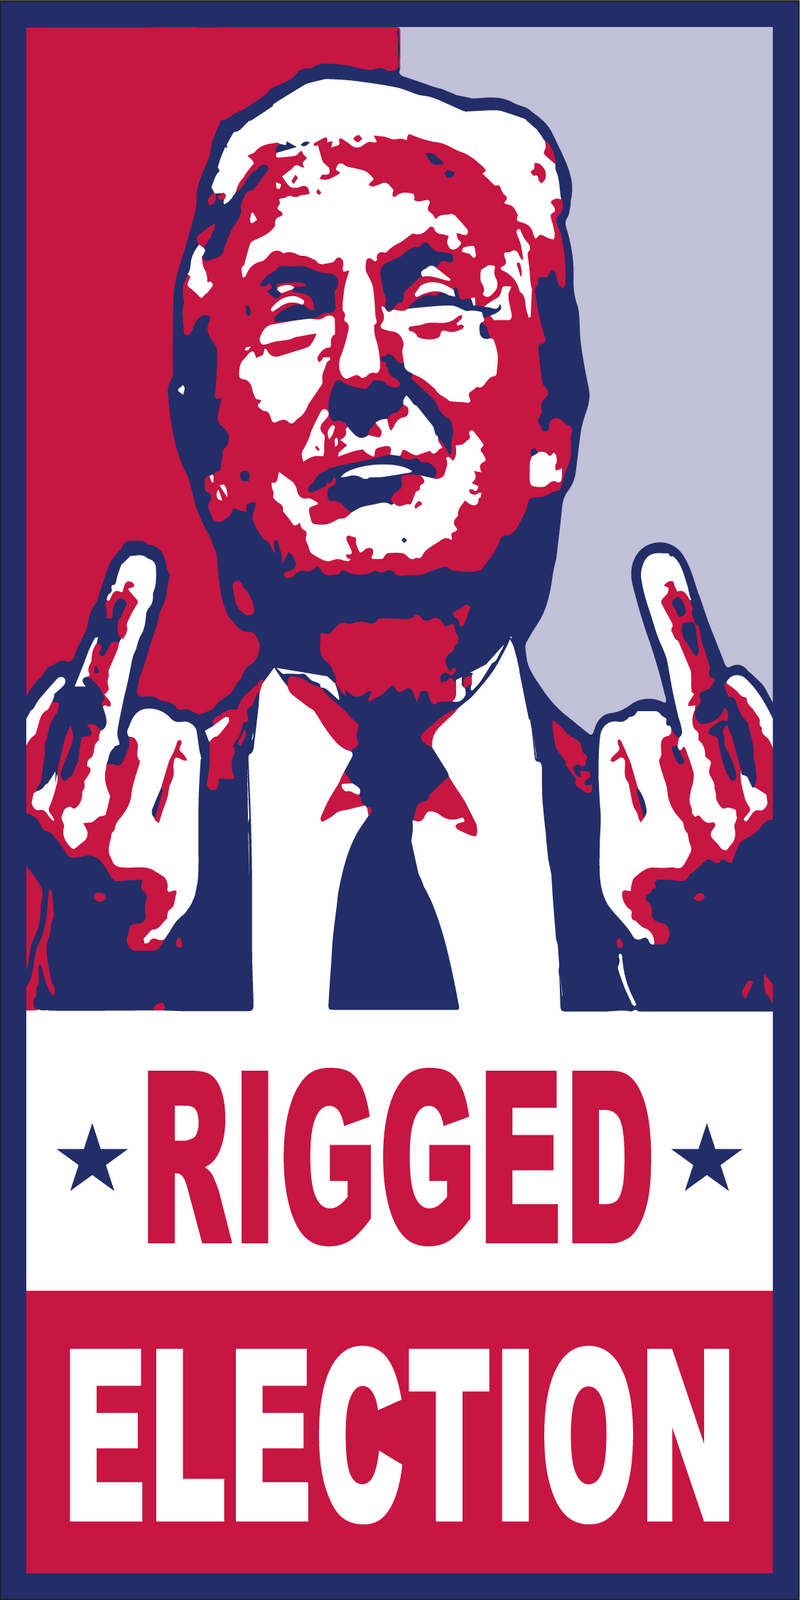 Trump Rigged Election Bumper Stickers Made in USA